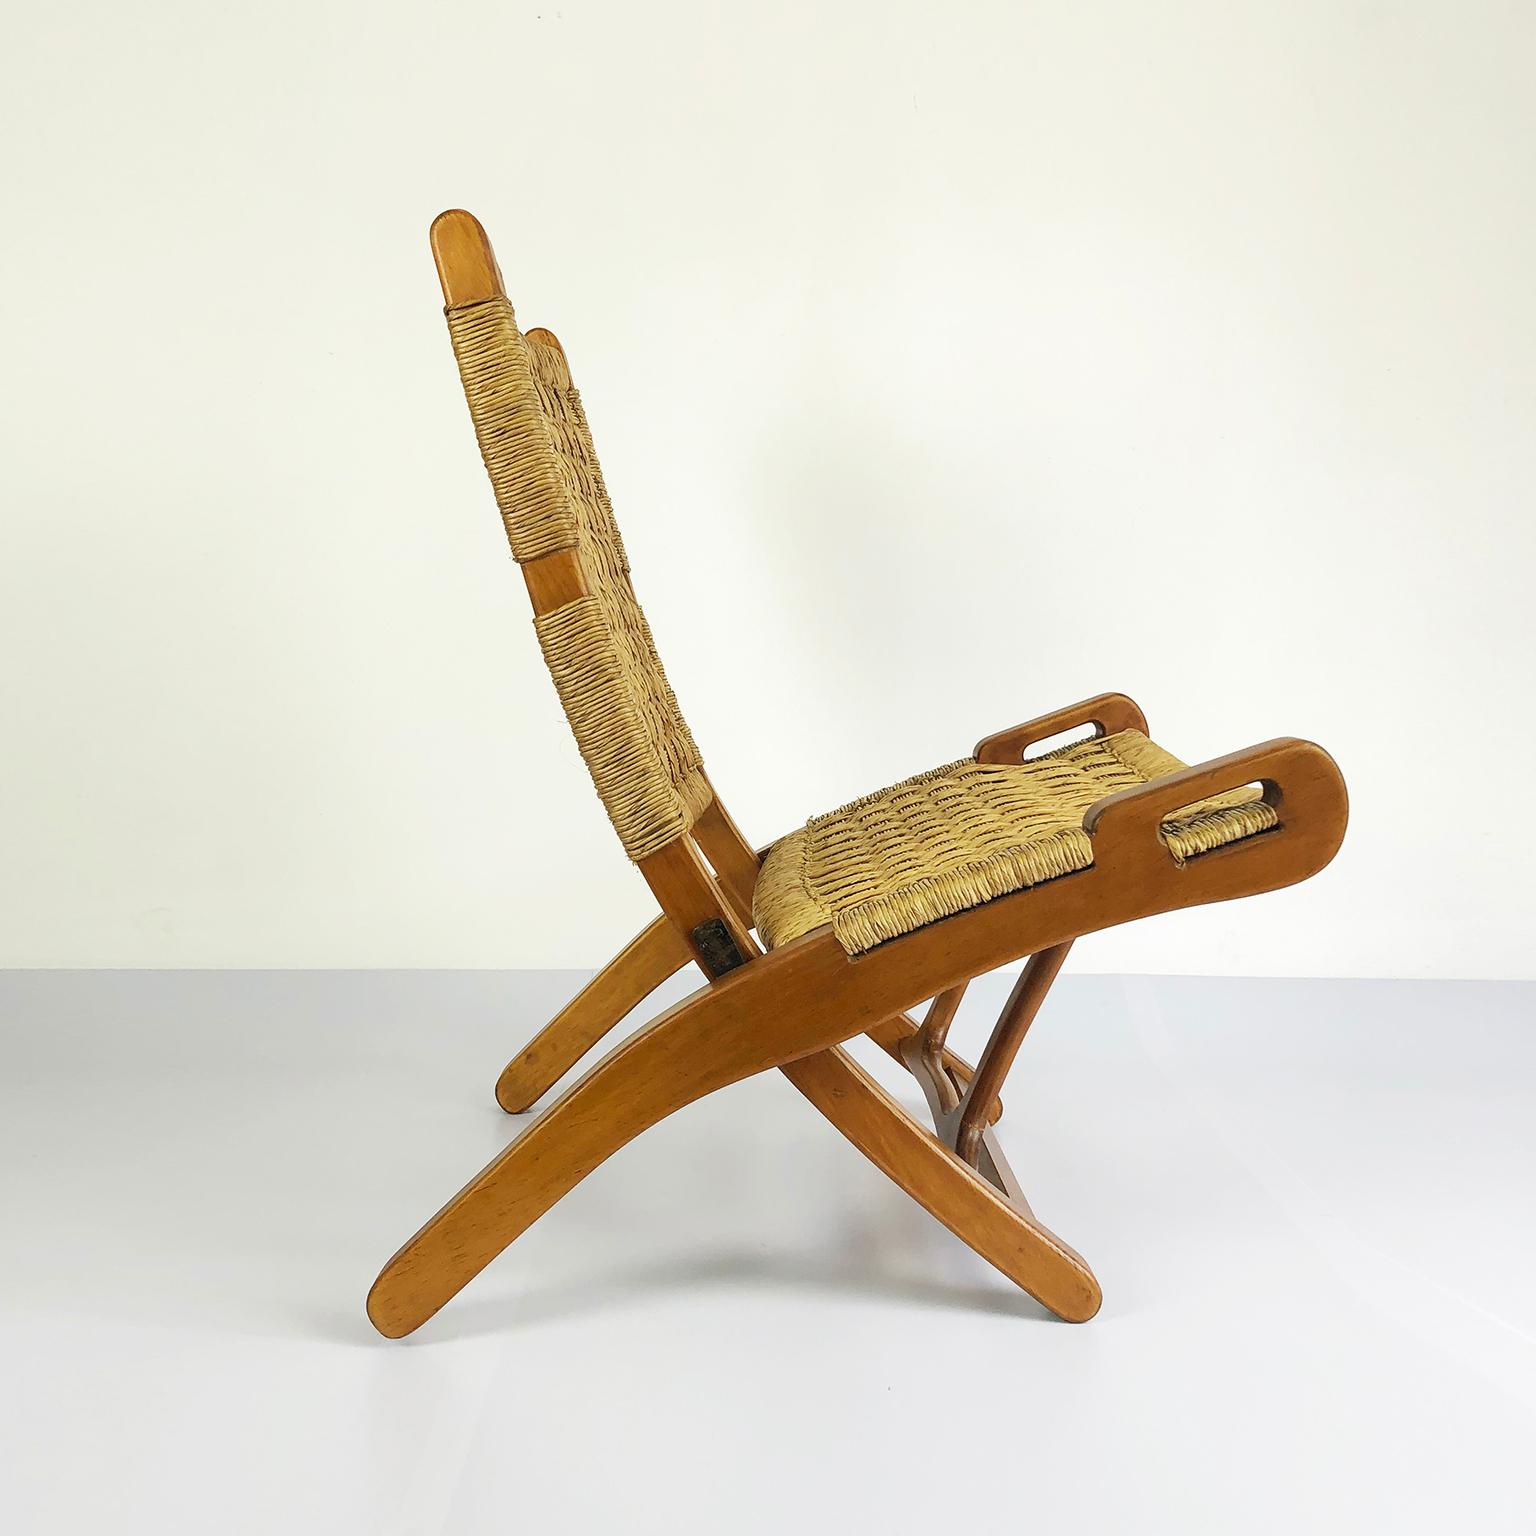 We offer this rare Mexican folding chair by Muebles Toluca, circa 1960. Made in primavera wood and natural palm cords.